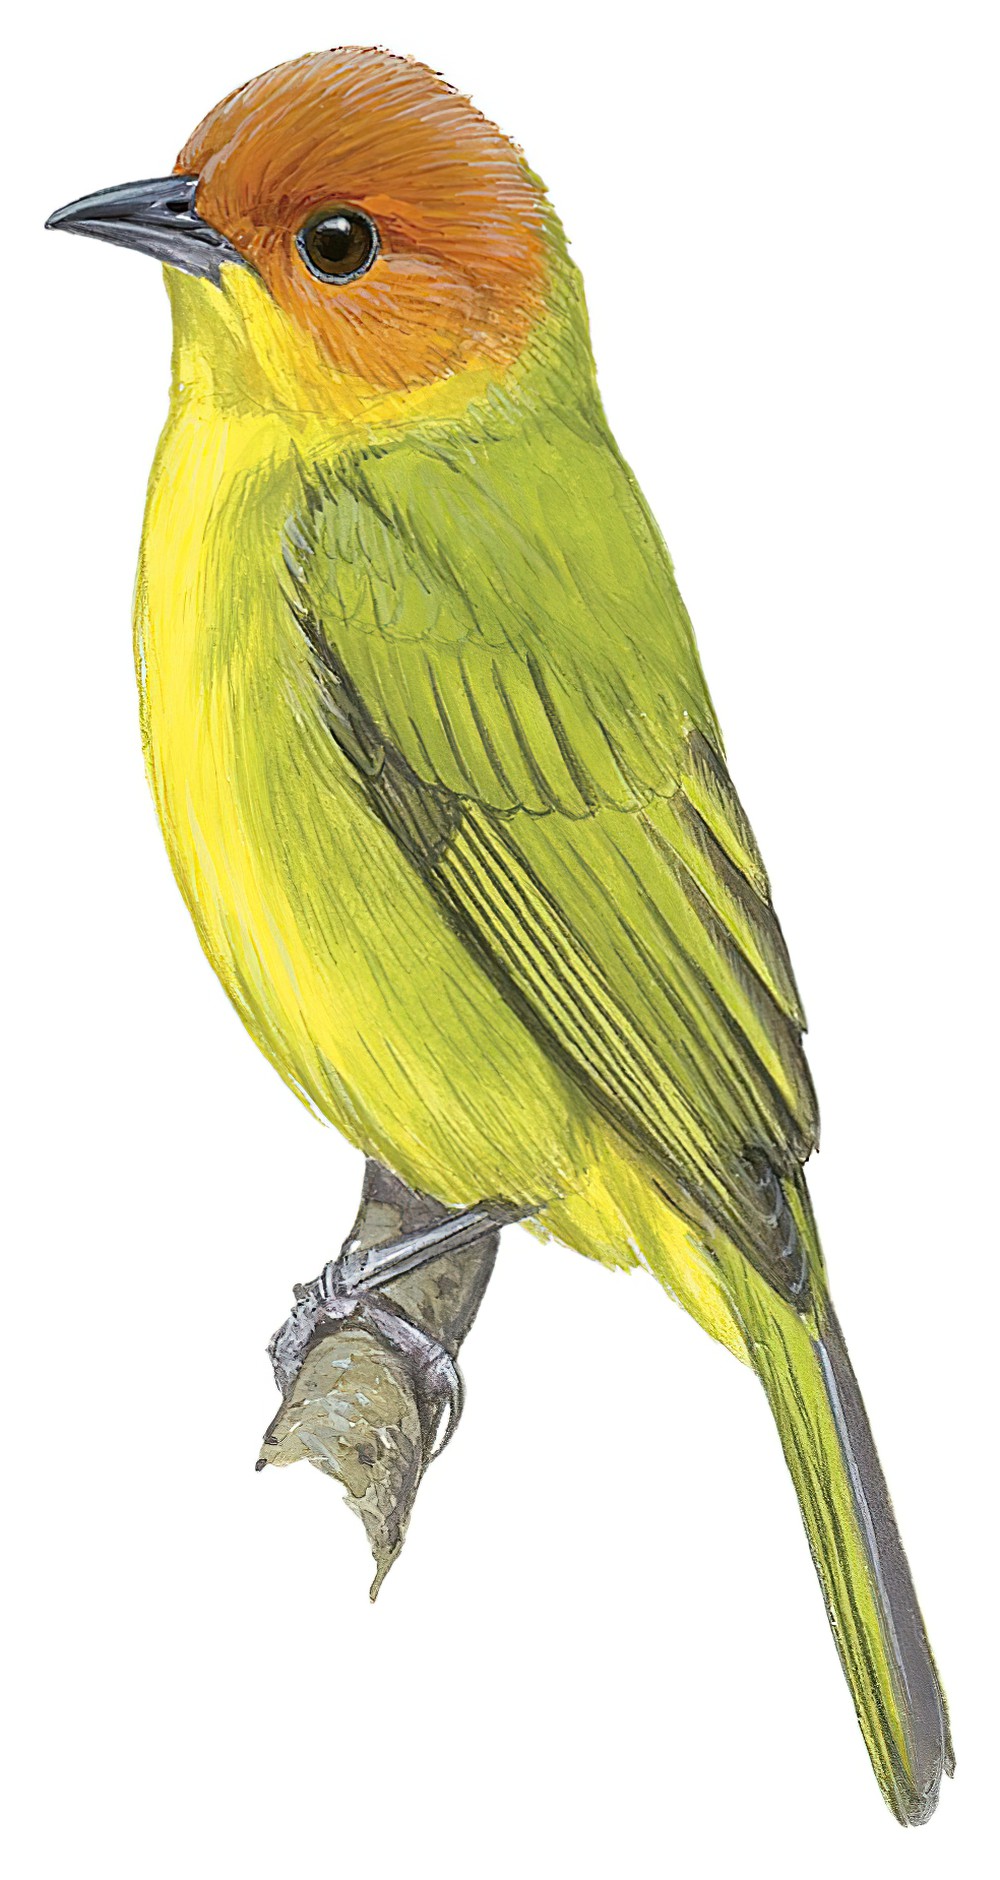 Rust-and-yellow Tanager / Thlypopsis ruficeps